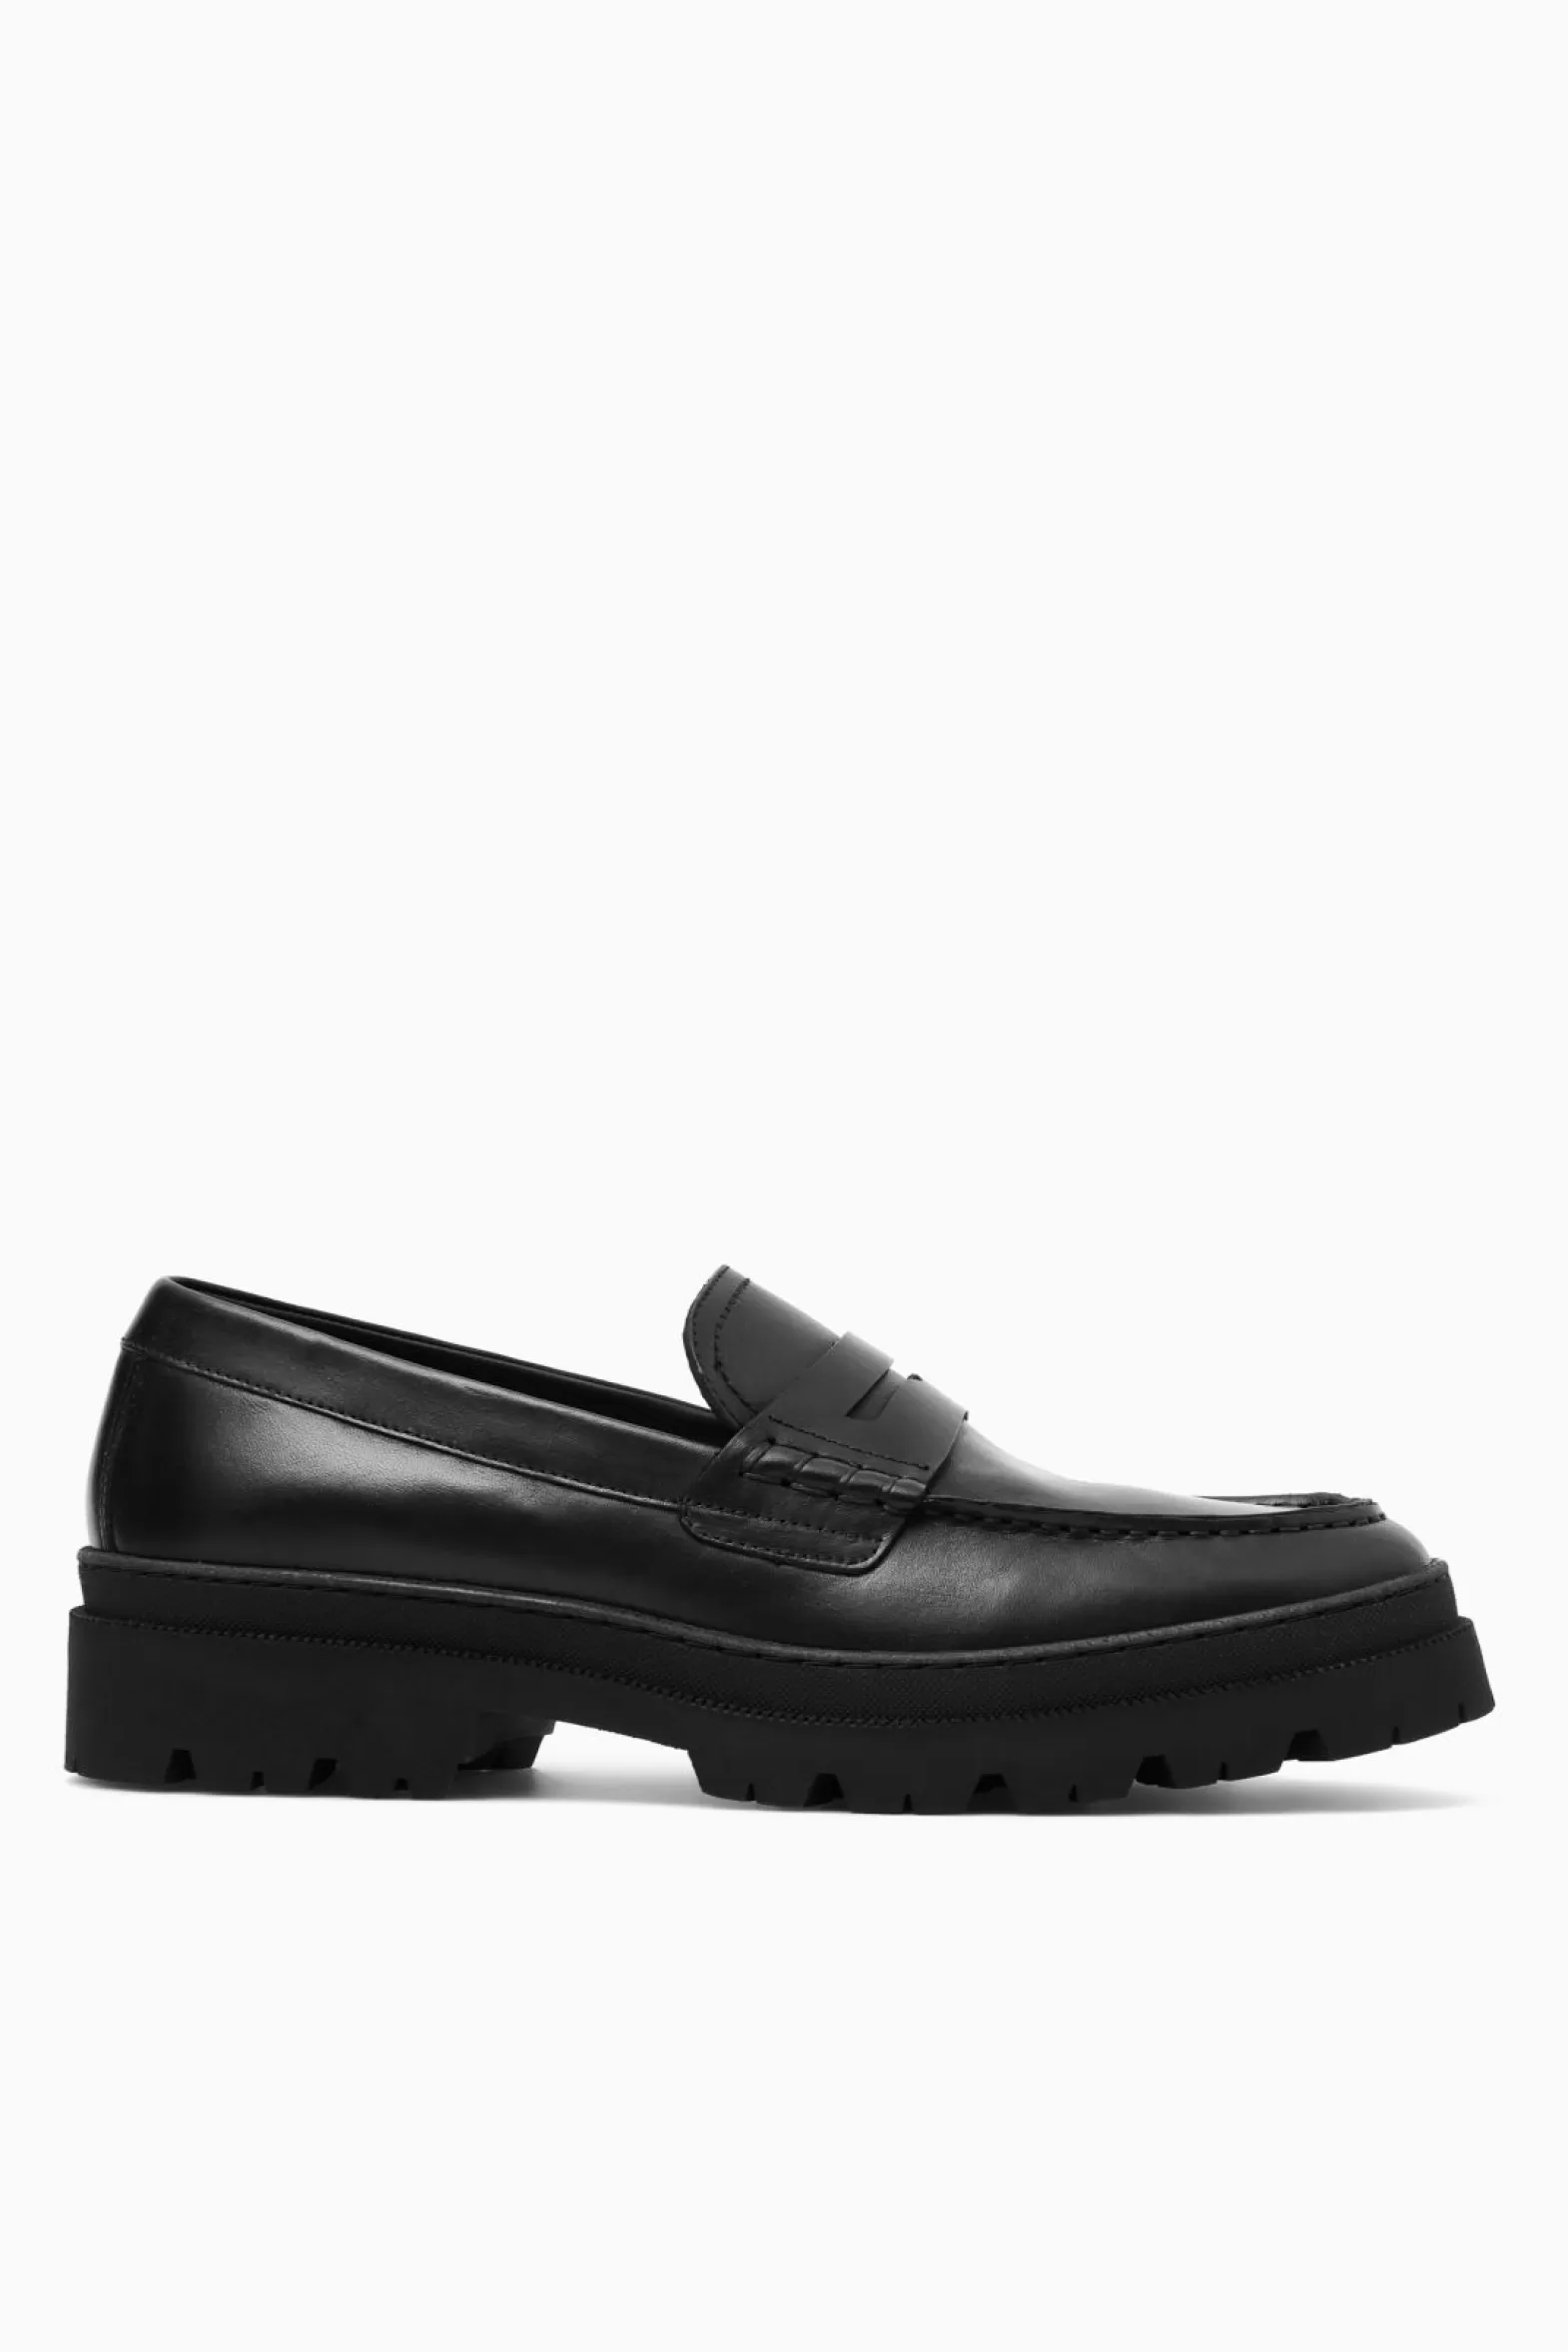 COS CHUNKY LEATHER LOAFERS